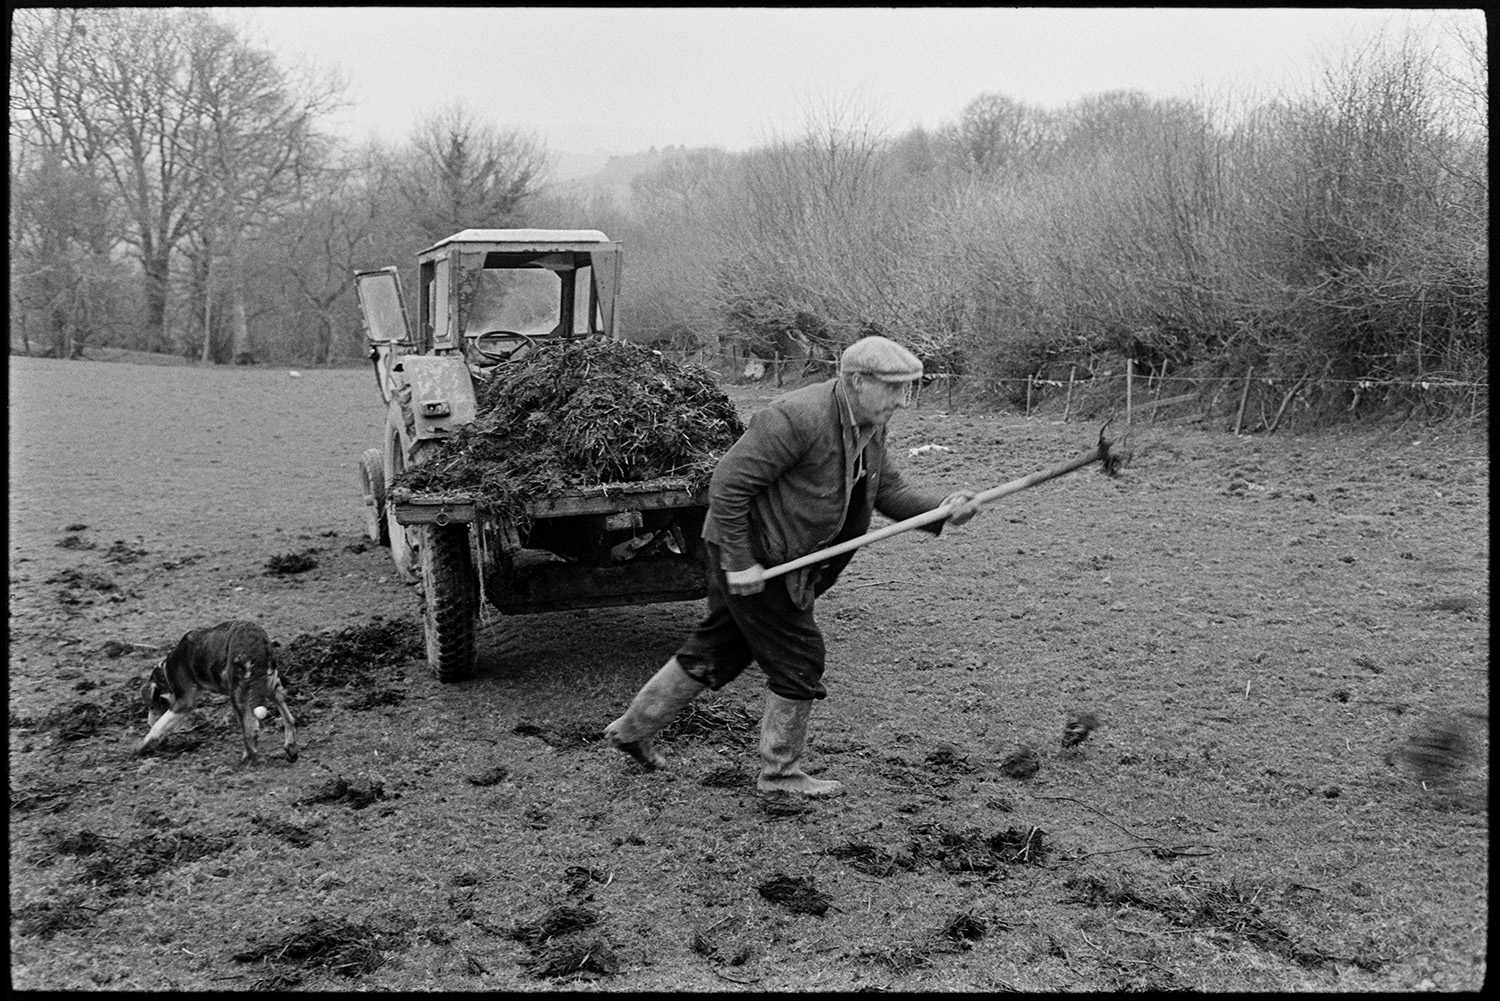 Farmer muck spreading by hand with tractor and trailer. 
[George Ayre muck spreading in a field at Ashwell, Dolton, by hand, using a fork. The manure is loaded on a tractor and trailer behind him, and a dog is with him.]